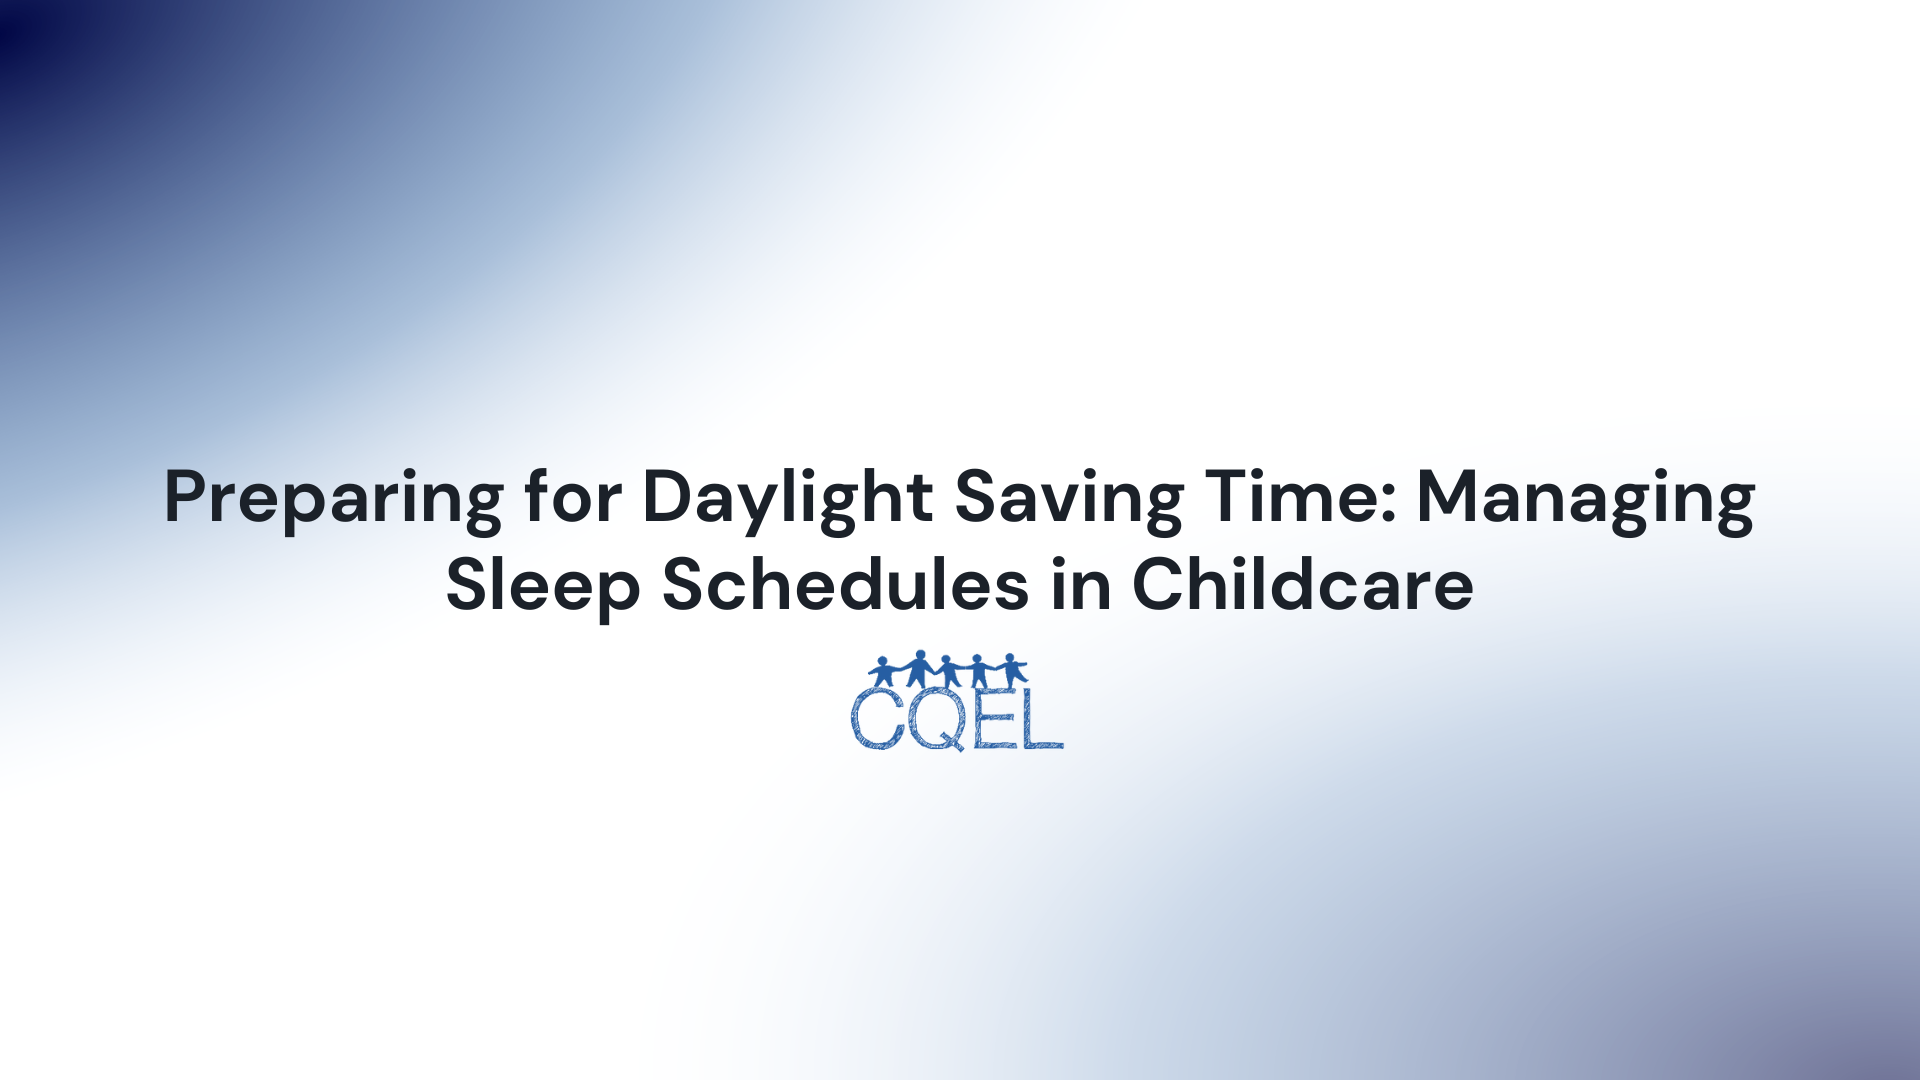 Preparing for Daylight Saving Time: Managing Sleep Schedules in Childcare